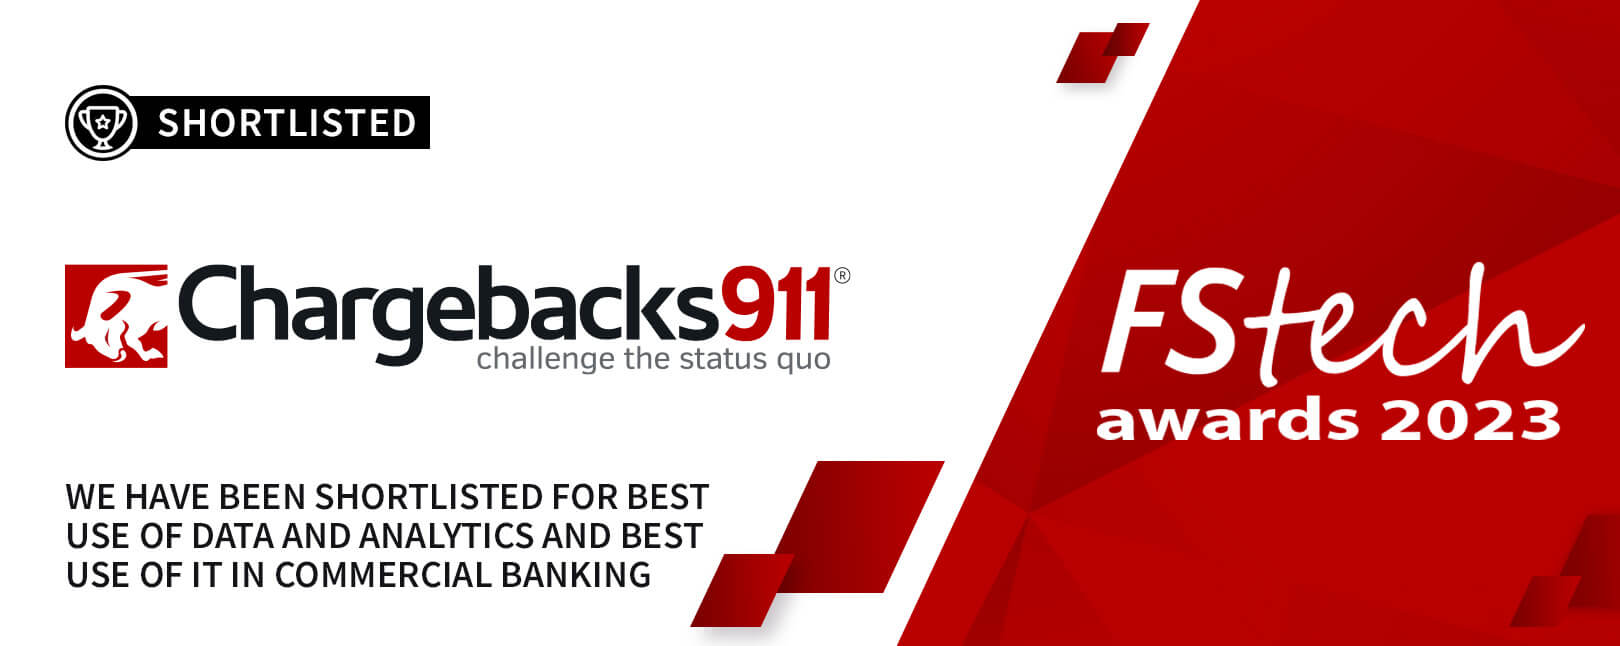 Chargebacks911®: The “Best Use of Data & Analytics” for 2023!